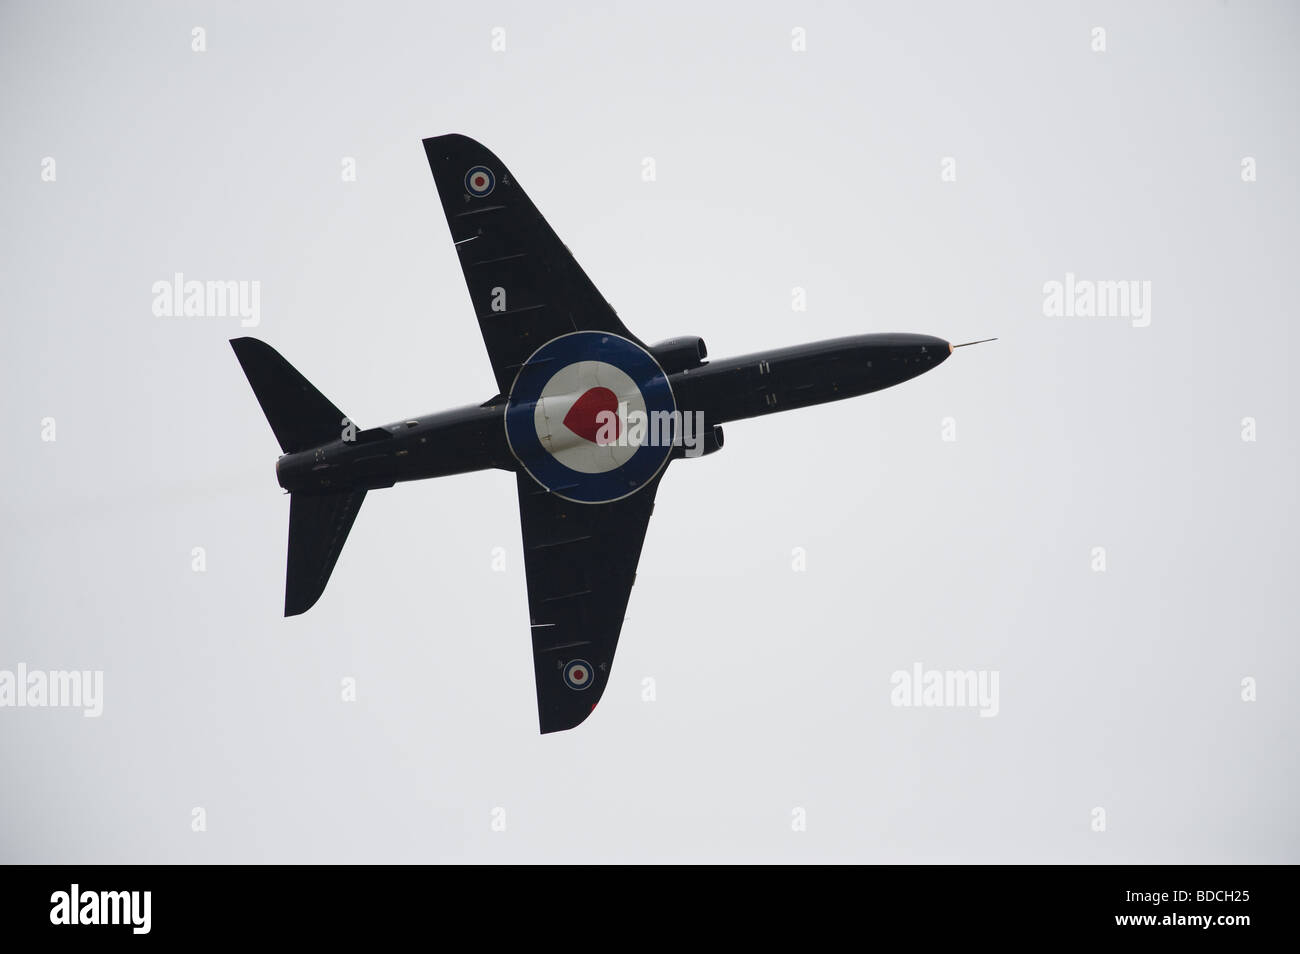 BAE Systems Hawk aircraft decorated in '100 Year of Naval Aviation' paint scheme. Stock Photo